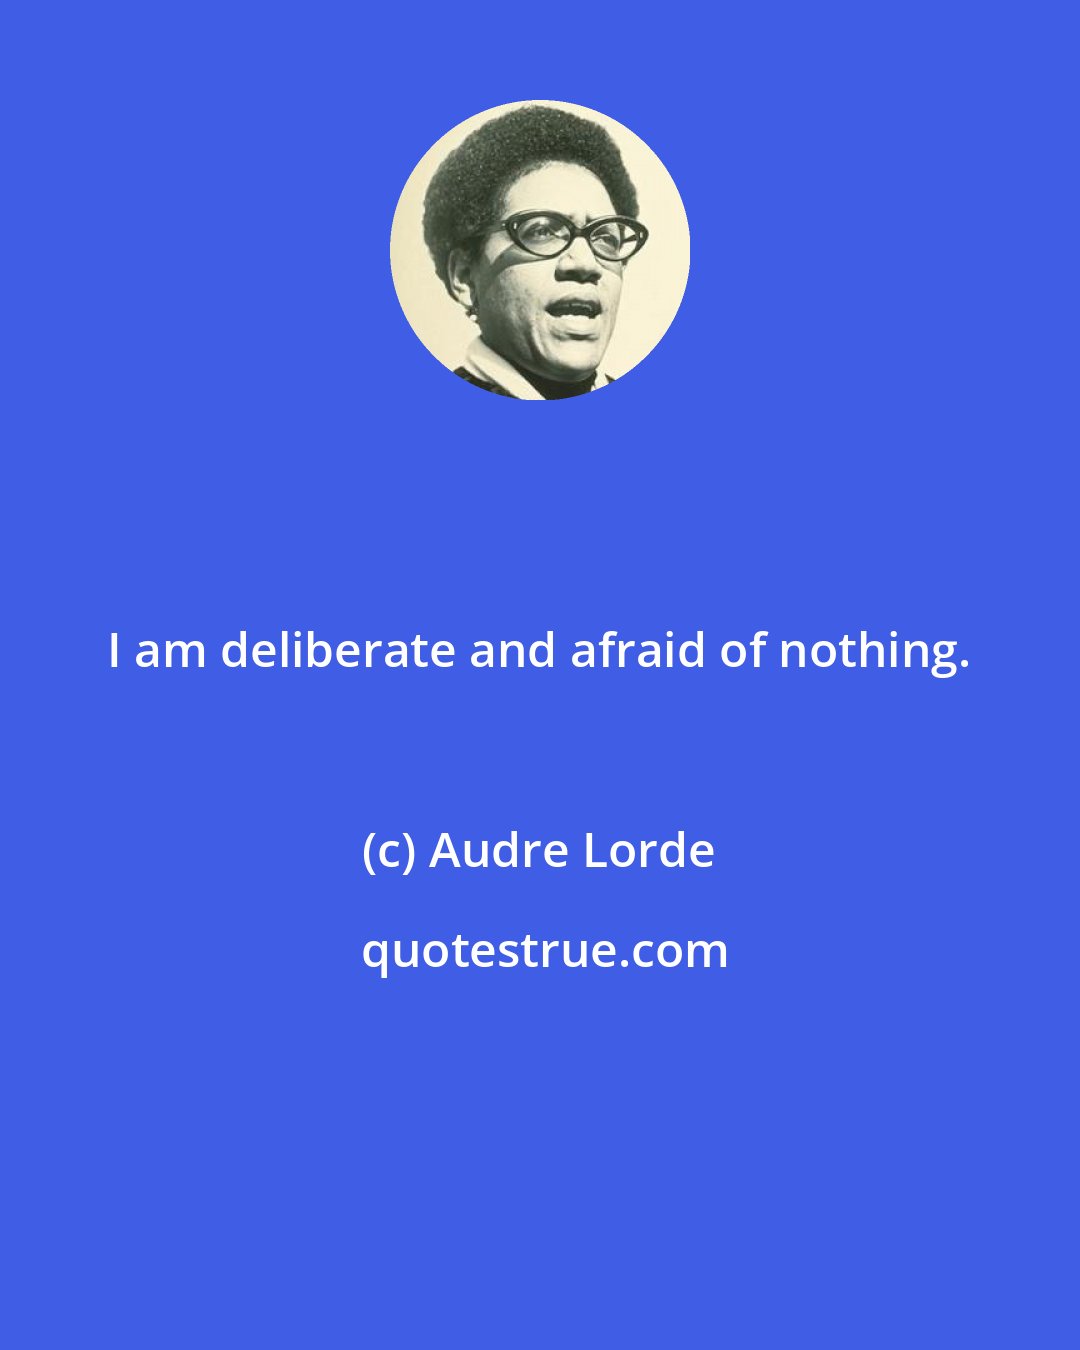 Audre Lorde: I am deliberate and afraid of nothing.